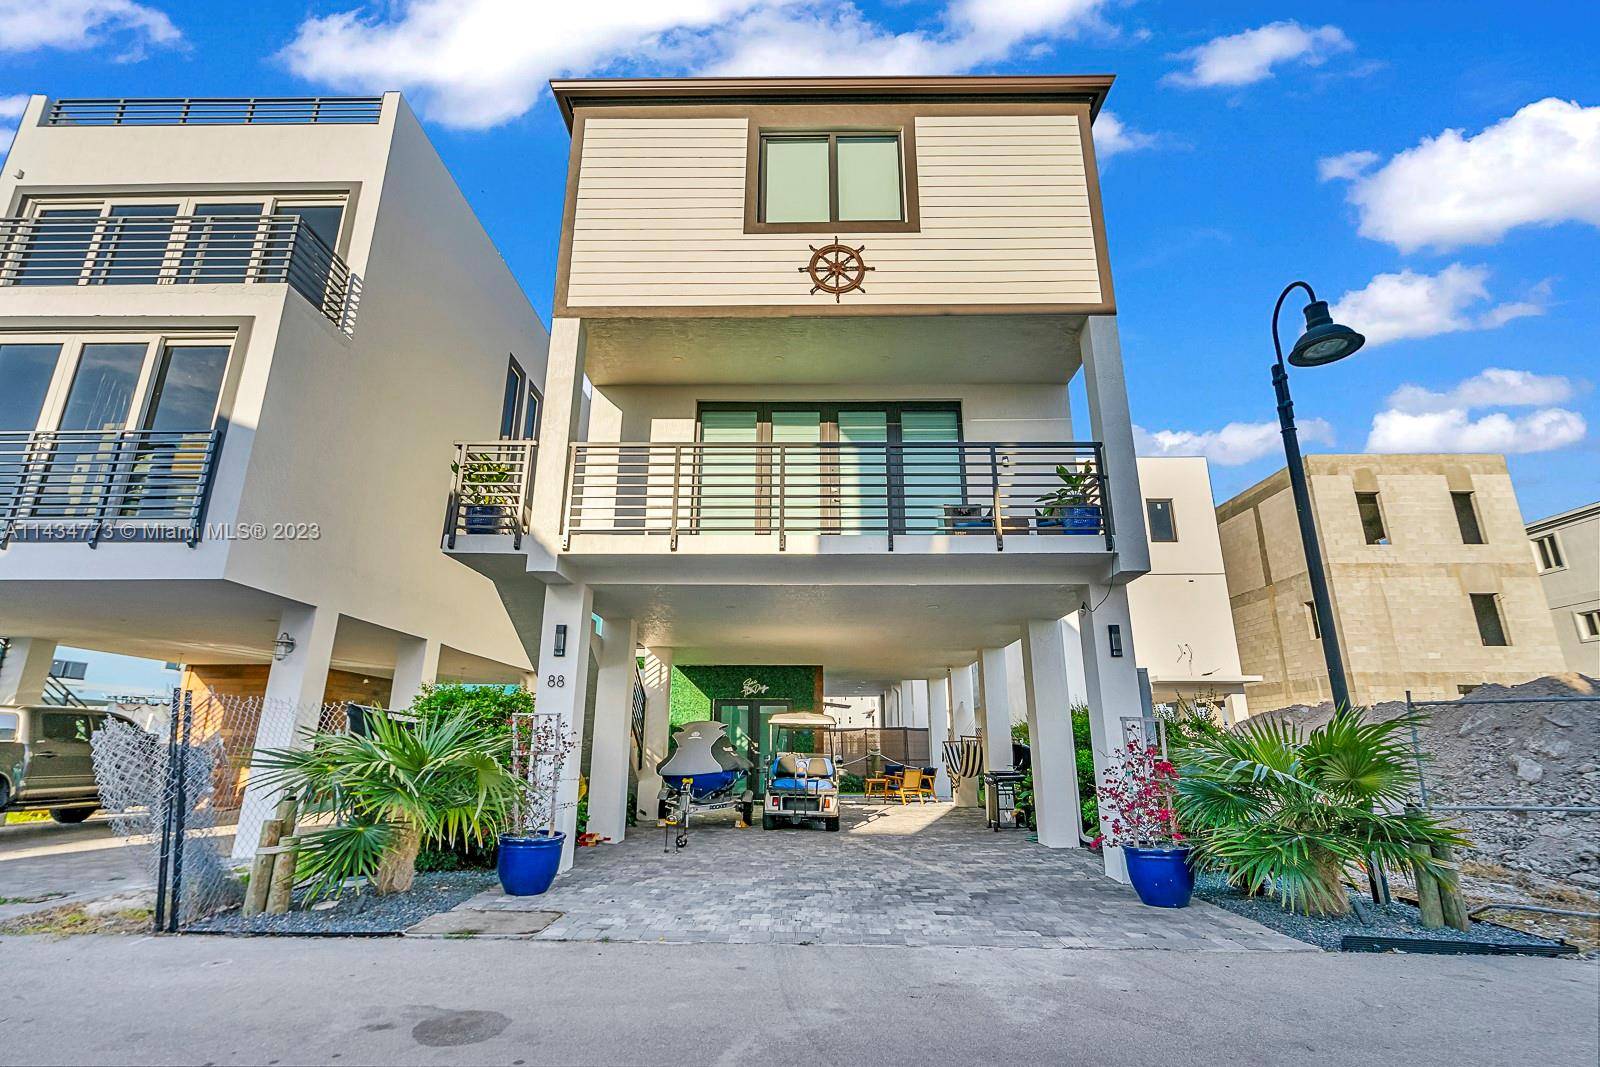 Be the first to enjoy this newly built and fully furnished home in Key Largo Ocean Resort.